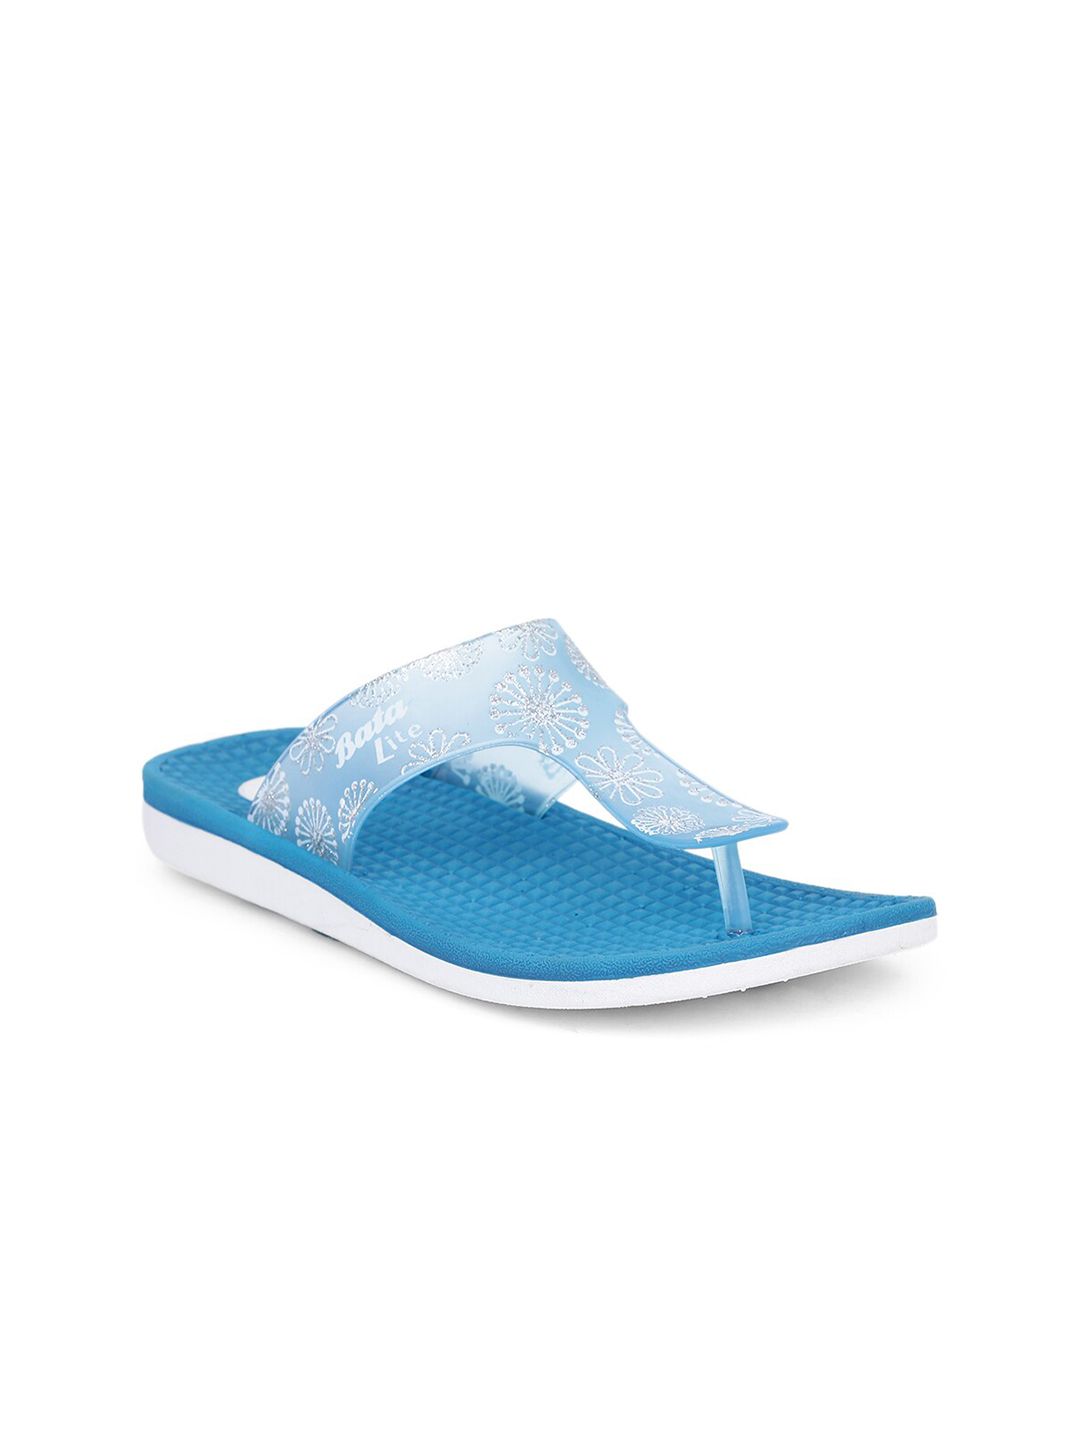 Bata Women Blue & White Printed Room Slippers Price in India